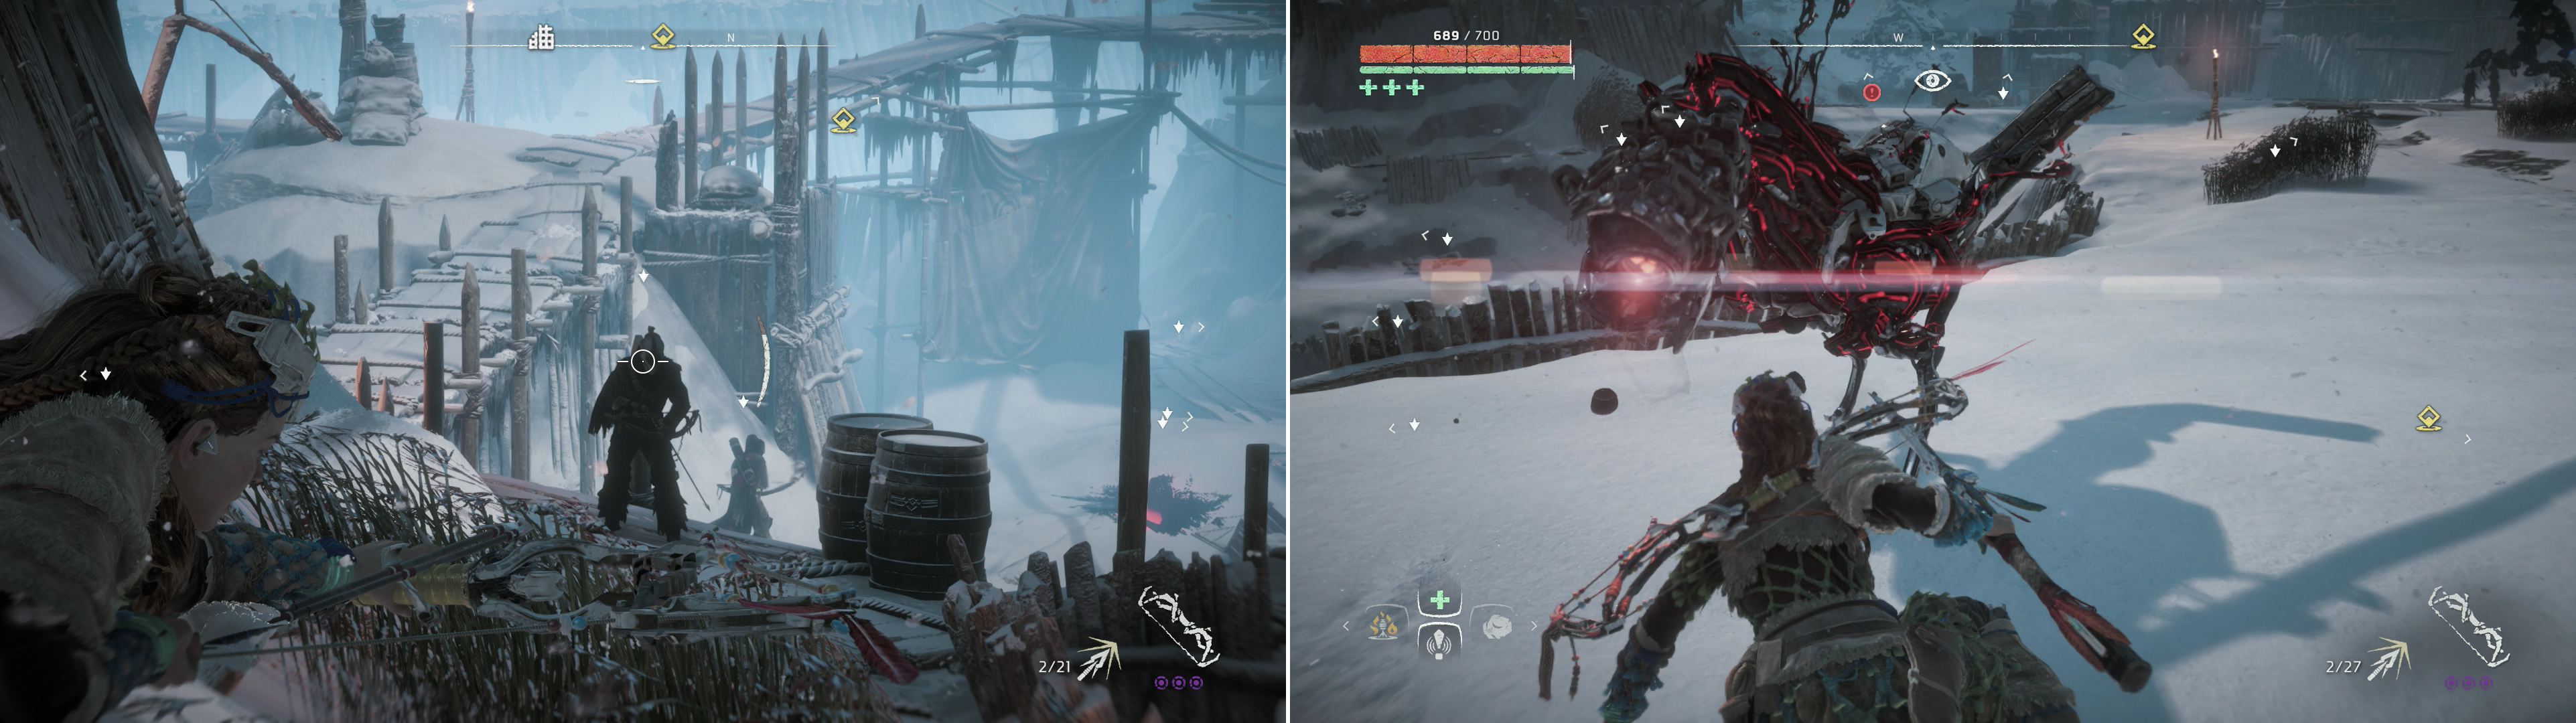 Pick off the Cultist soldiers from a distance (left), and sneak up and exterminate their Corrupted Watchers (right).